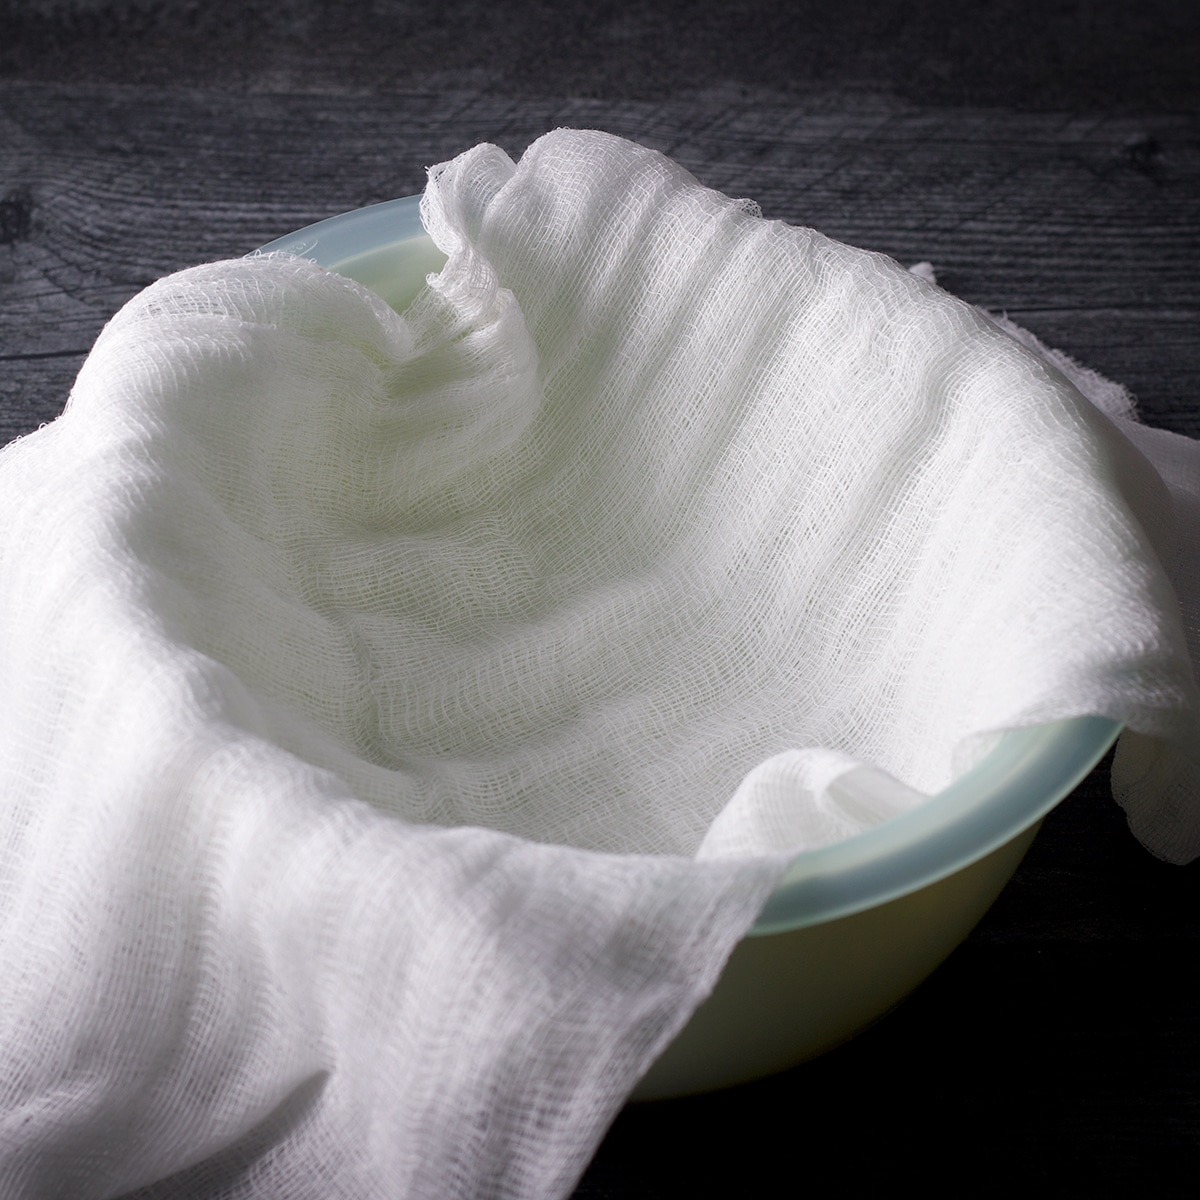 A cheesecloth lined strainer set inside a bowl.